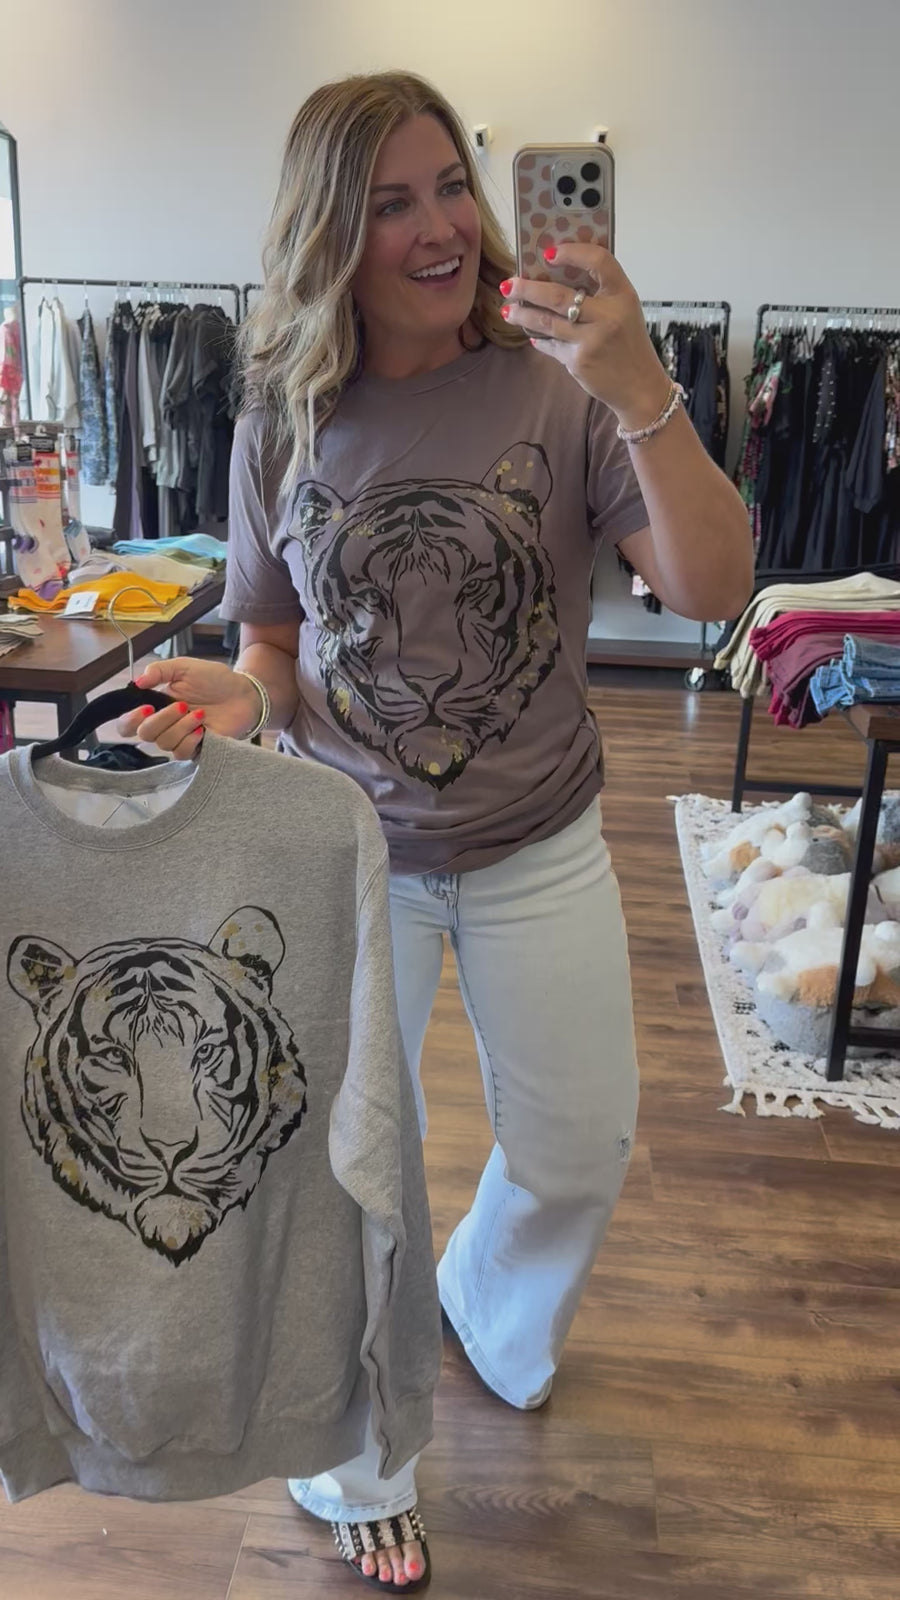 Easy Tiger Graphic Tee Shirt